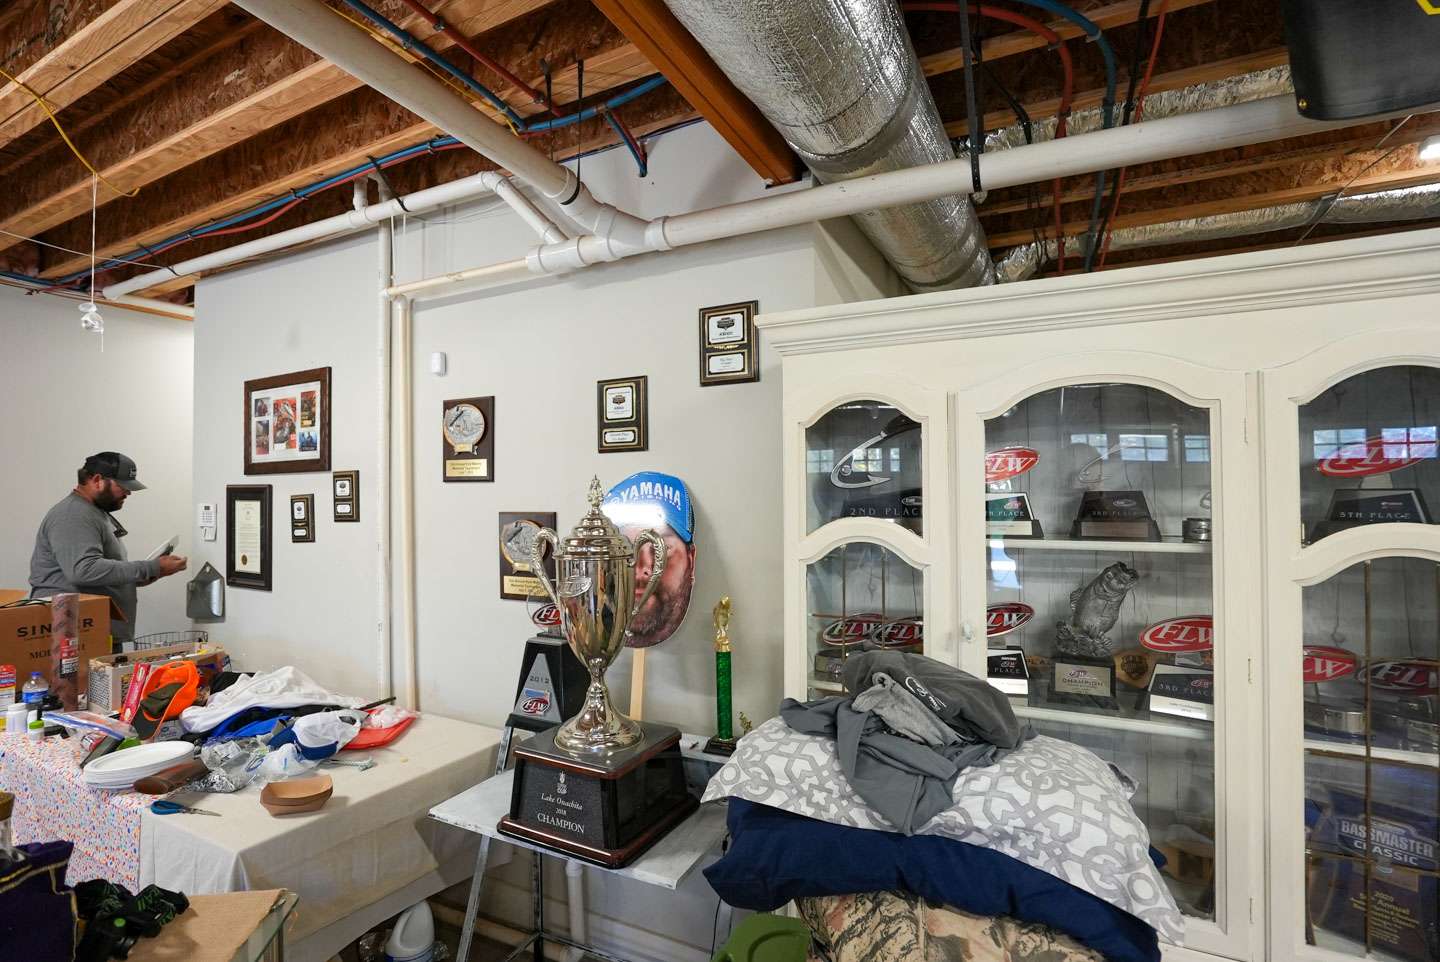 Just a short walk from Davis' shop is his garage, which is home to numerous cool items. 